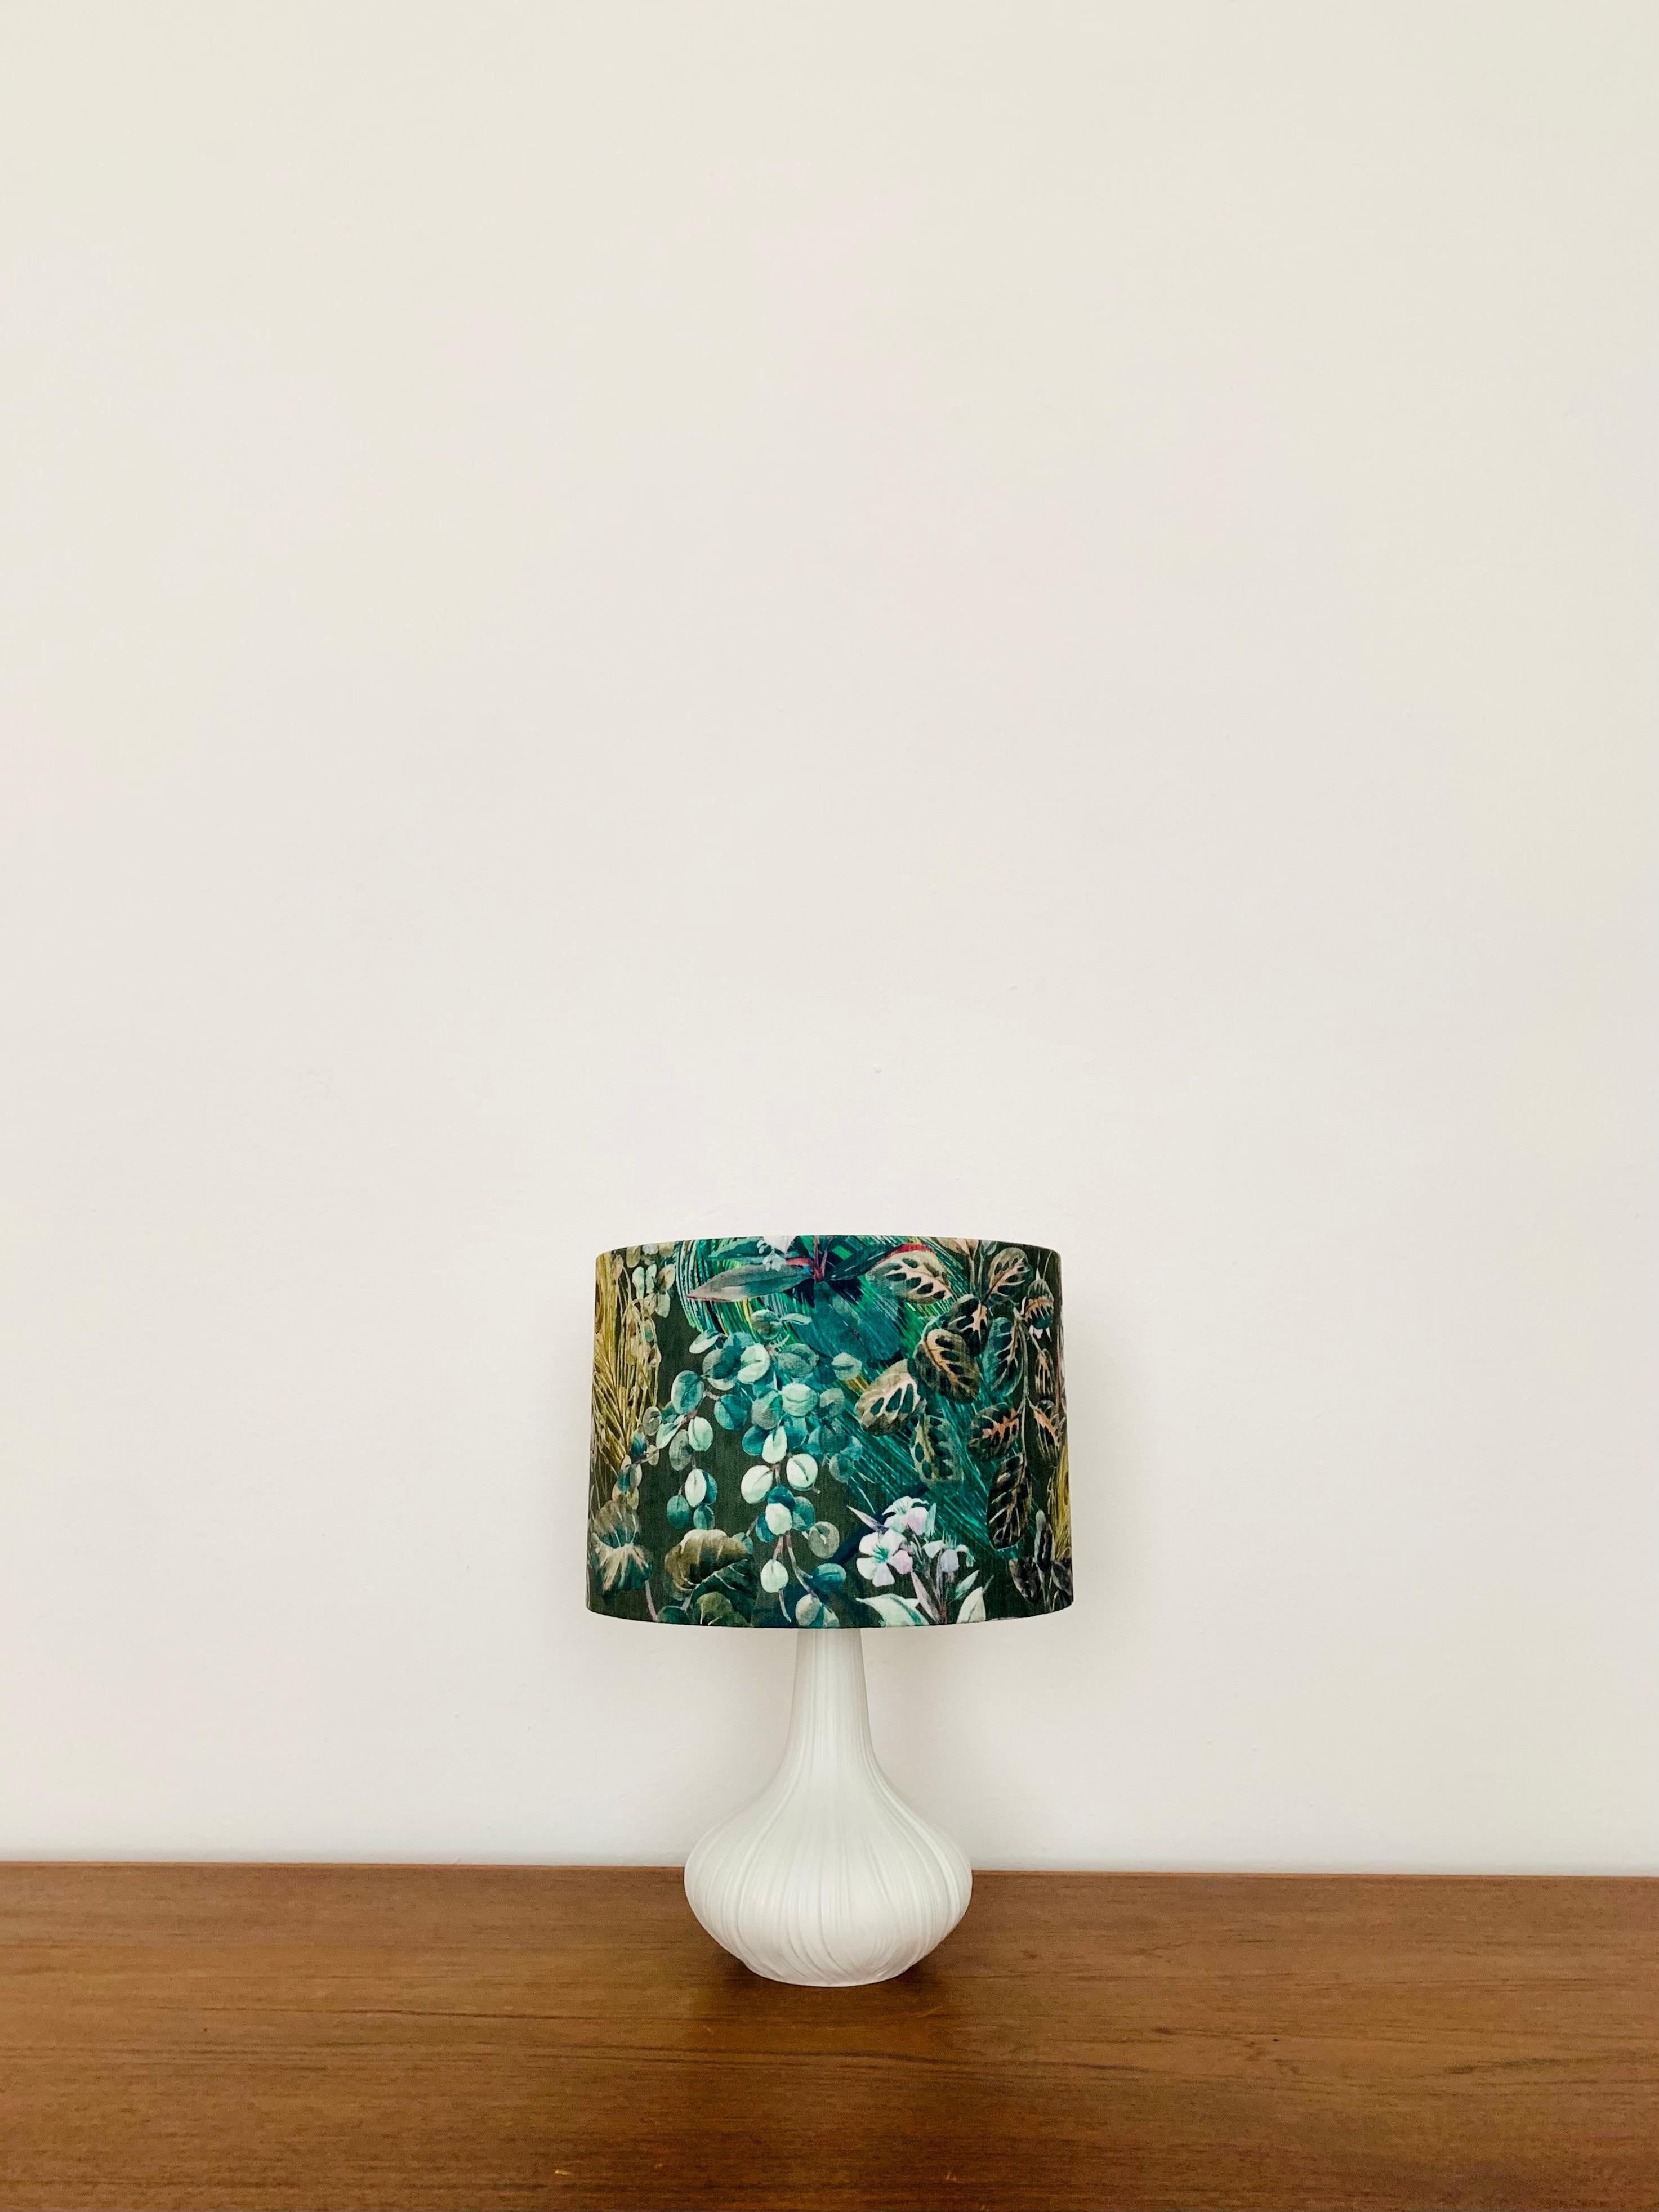 Mid-20th Century Porcelain Table Lamp by Rosenthal Studio Line  For Sale